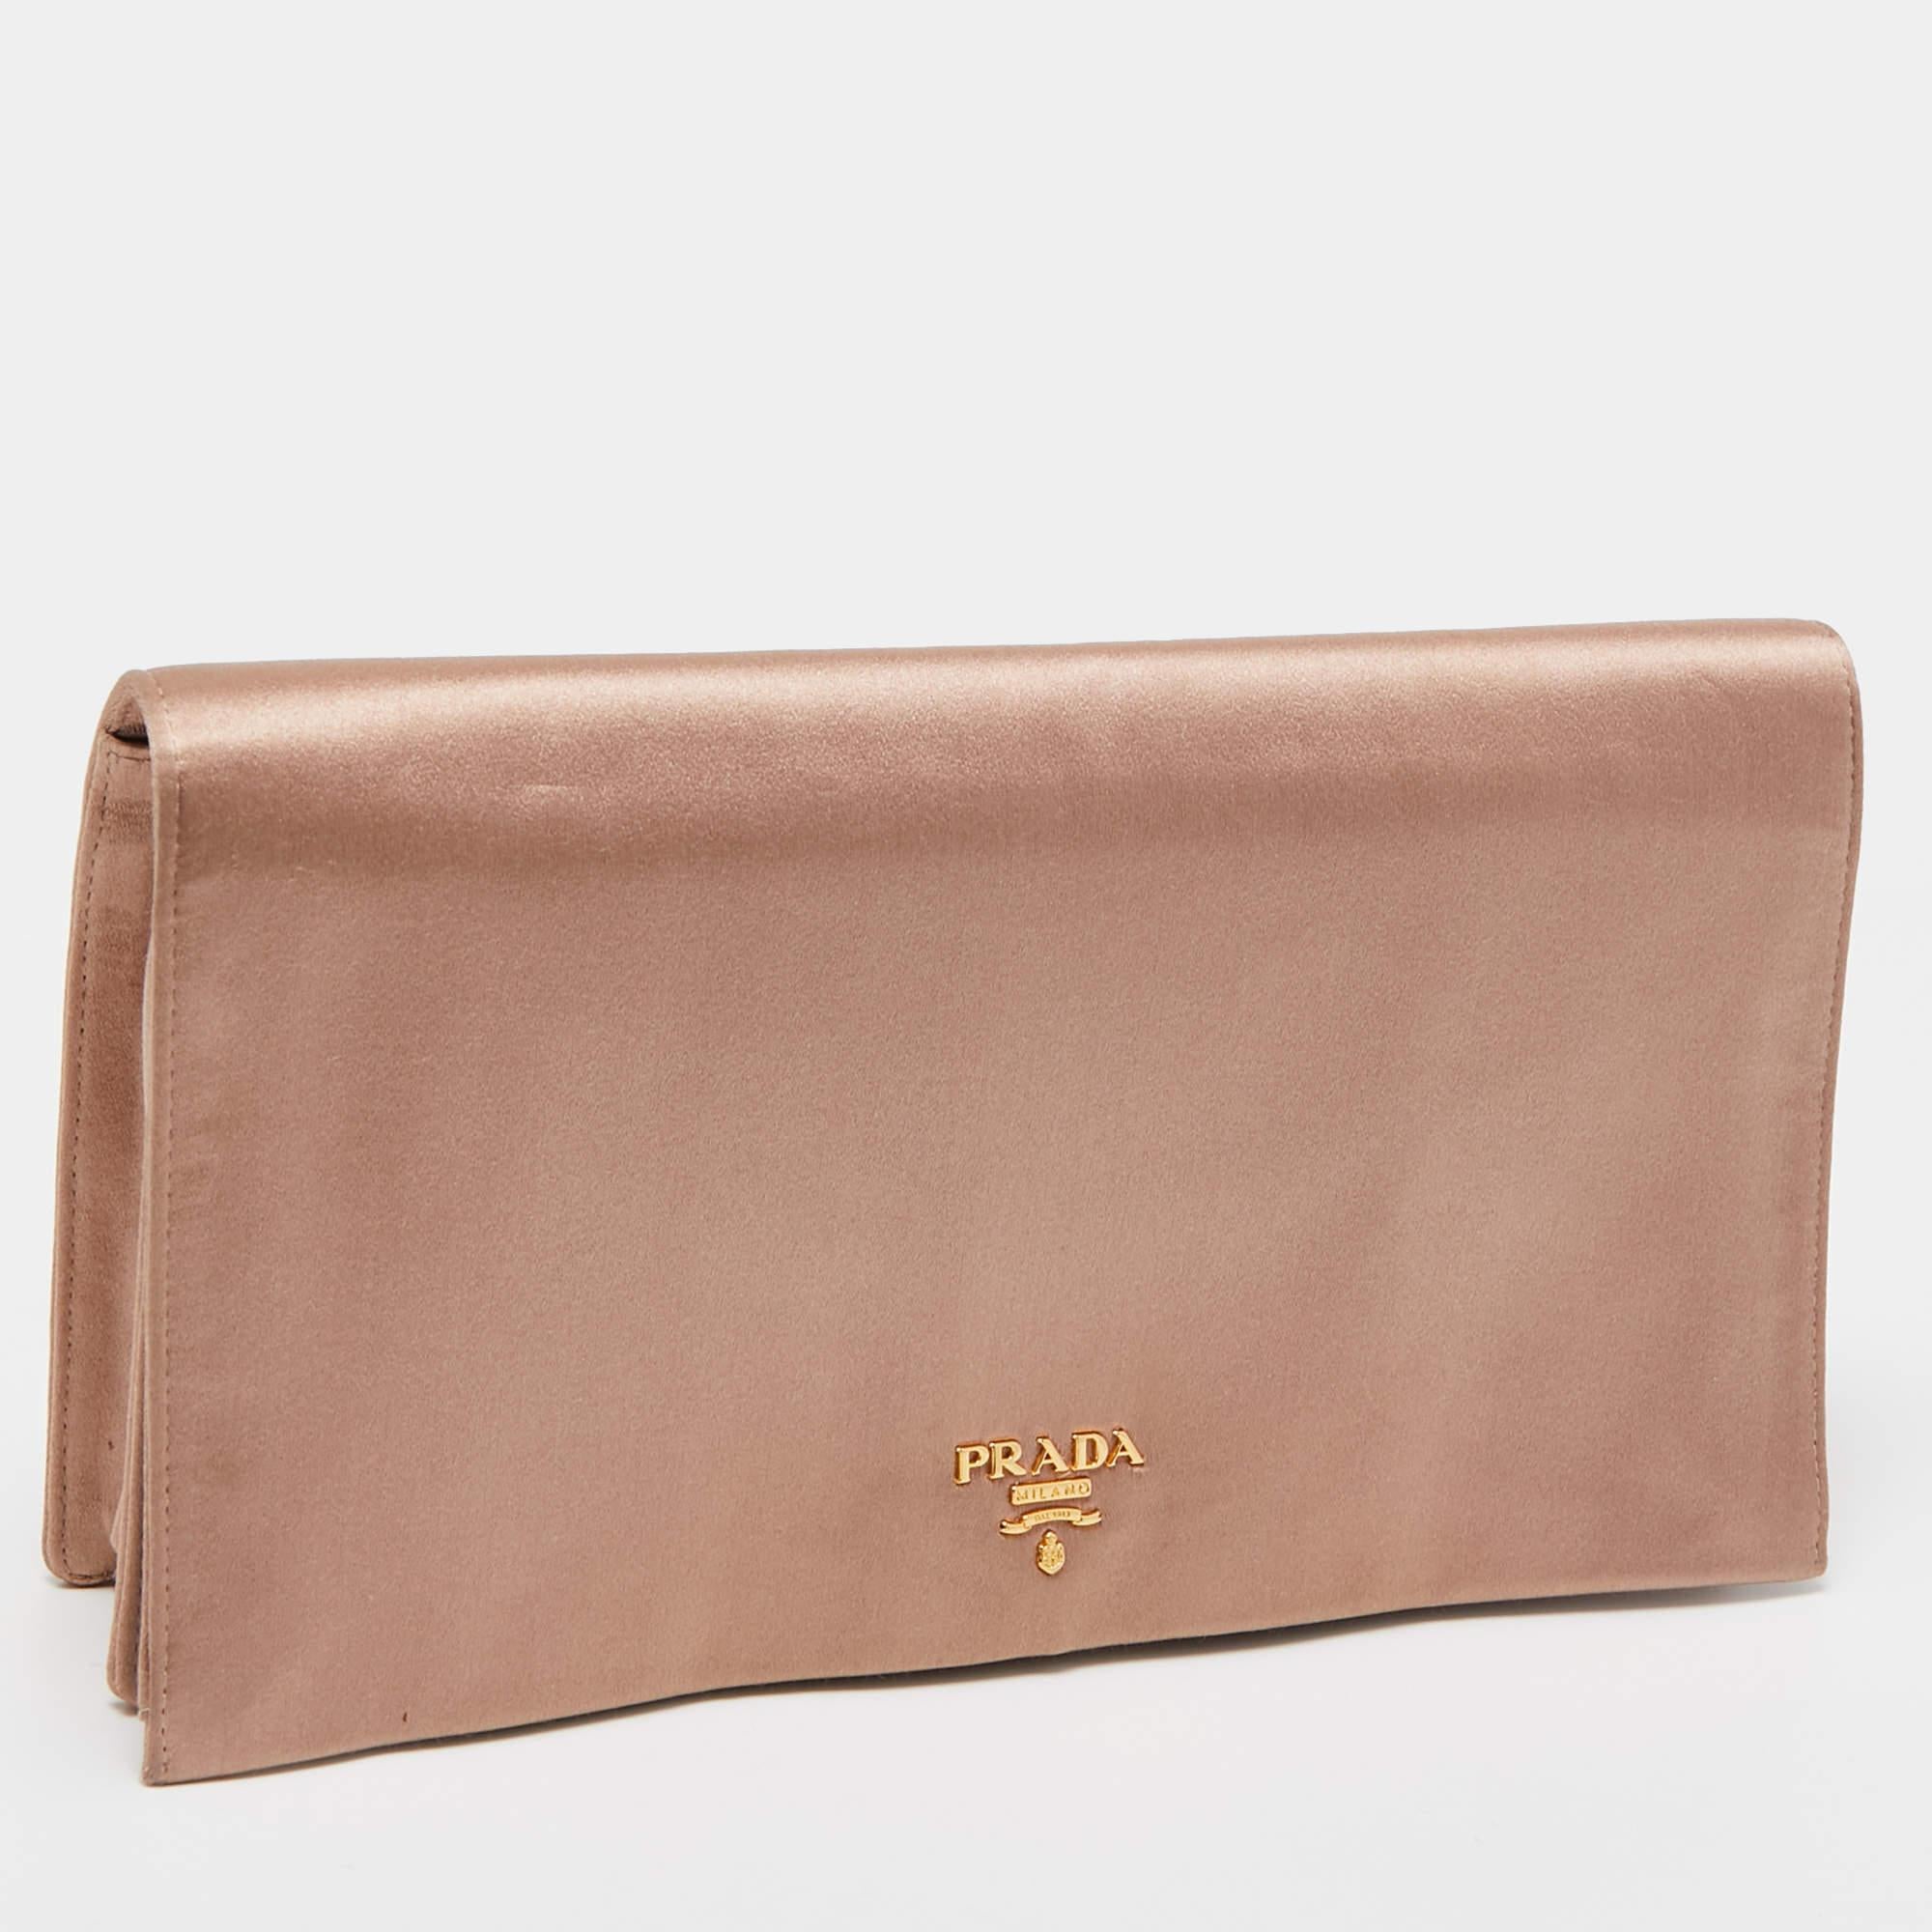 Thoughtful details, high quality, and everyday convenience mark this Prada clutch. It is sewn with skill to deliver a refined look and an impeccable finish.

